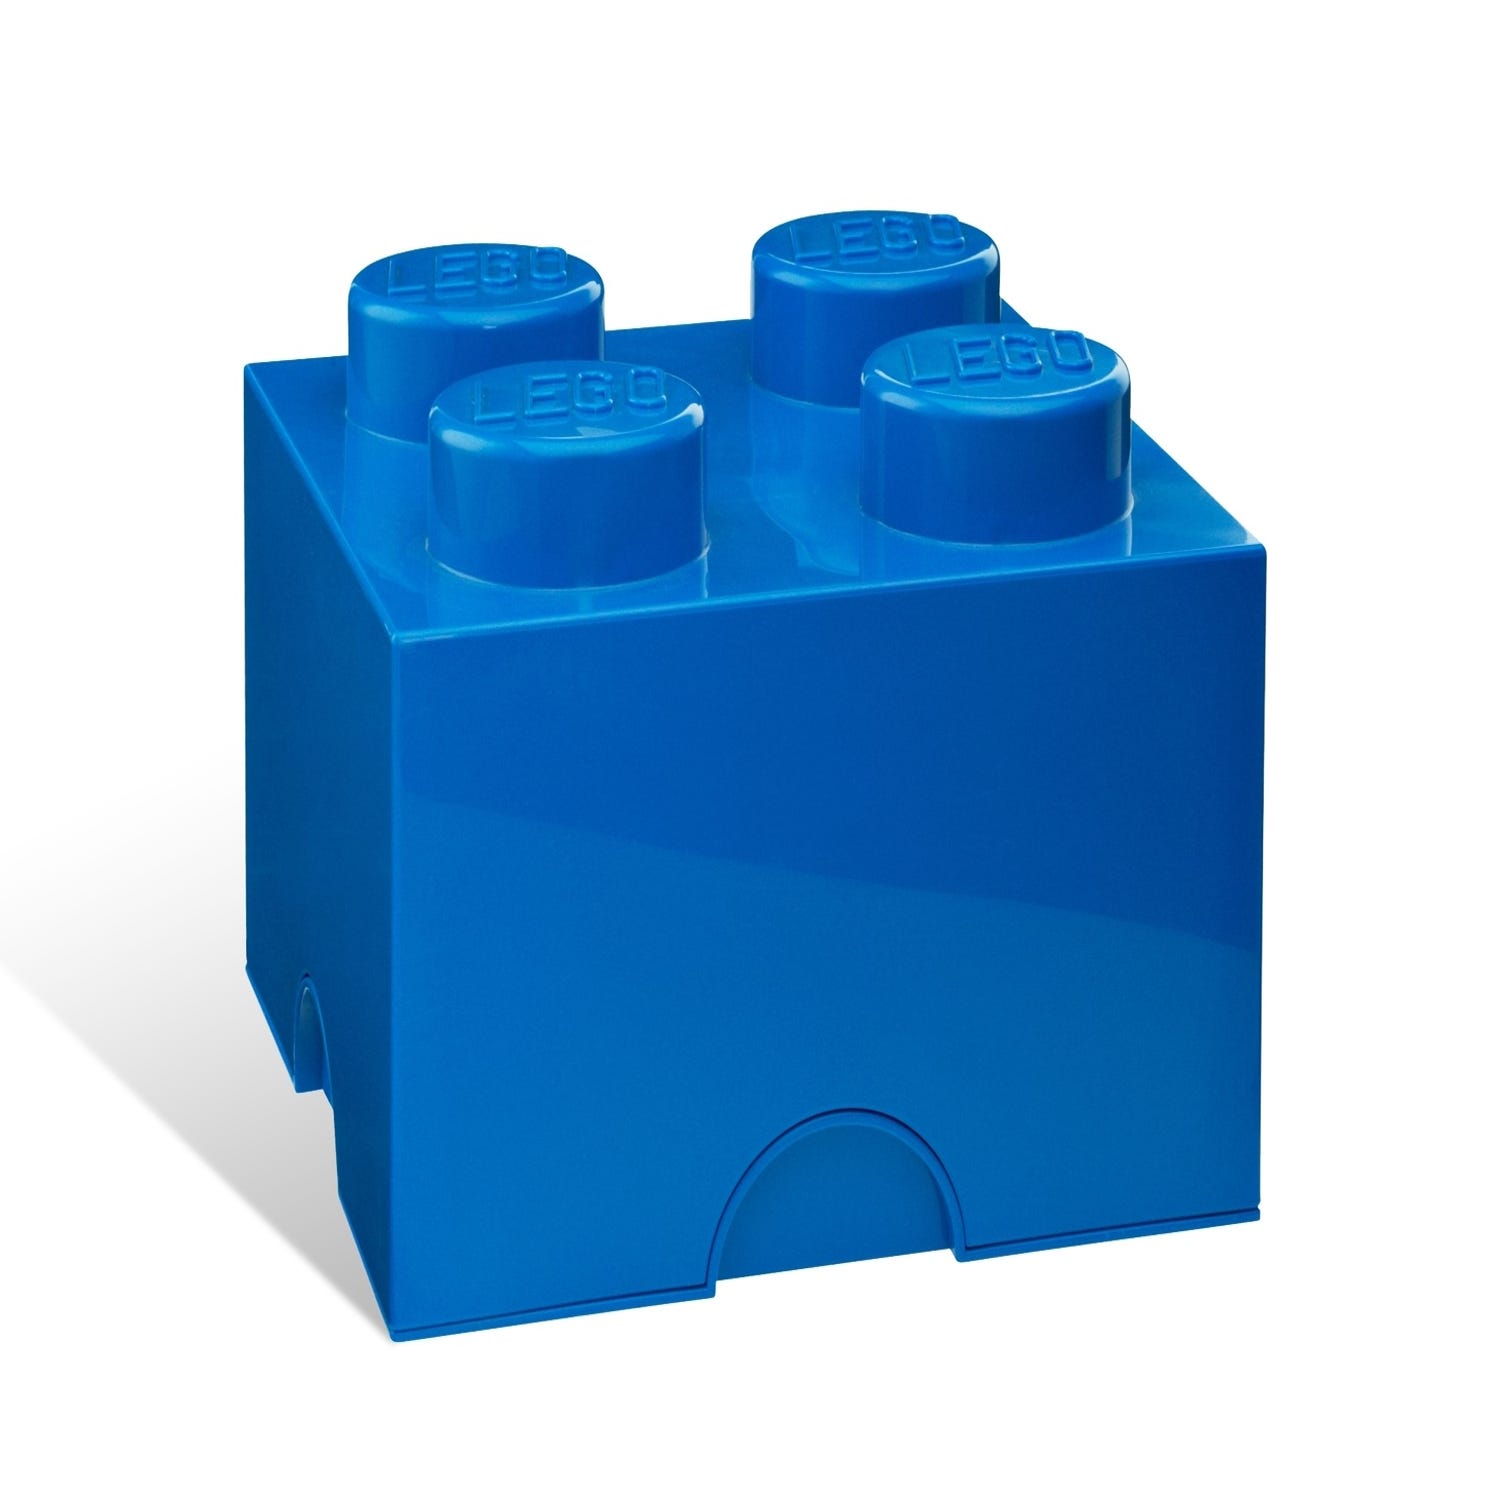 LEGO® 4-stud Blue Brick 5001383 | Other | Buy online at the Official LEGO® Shop US